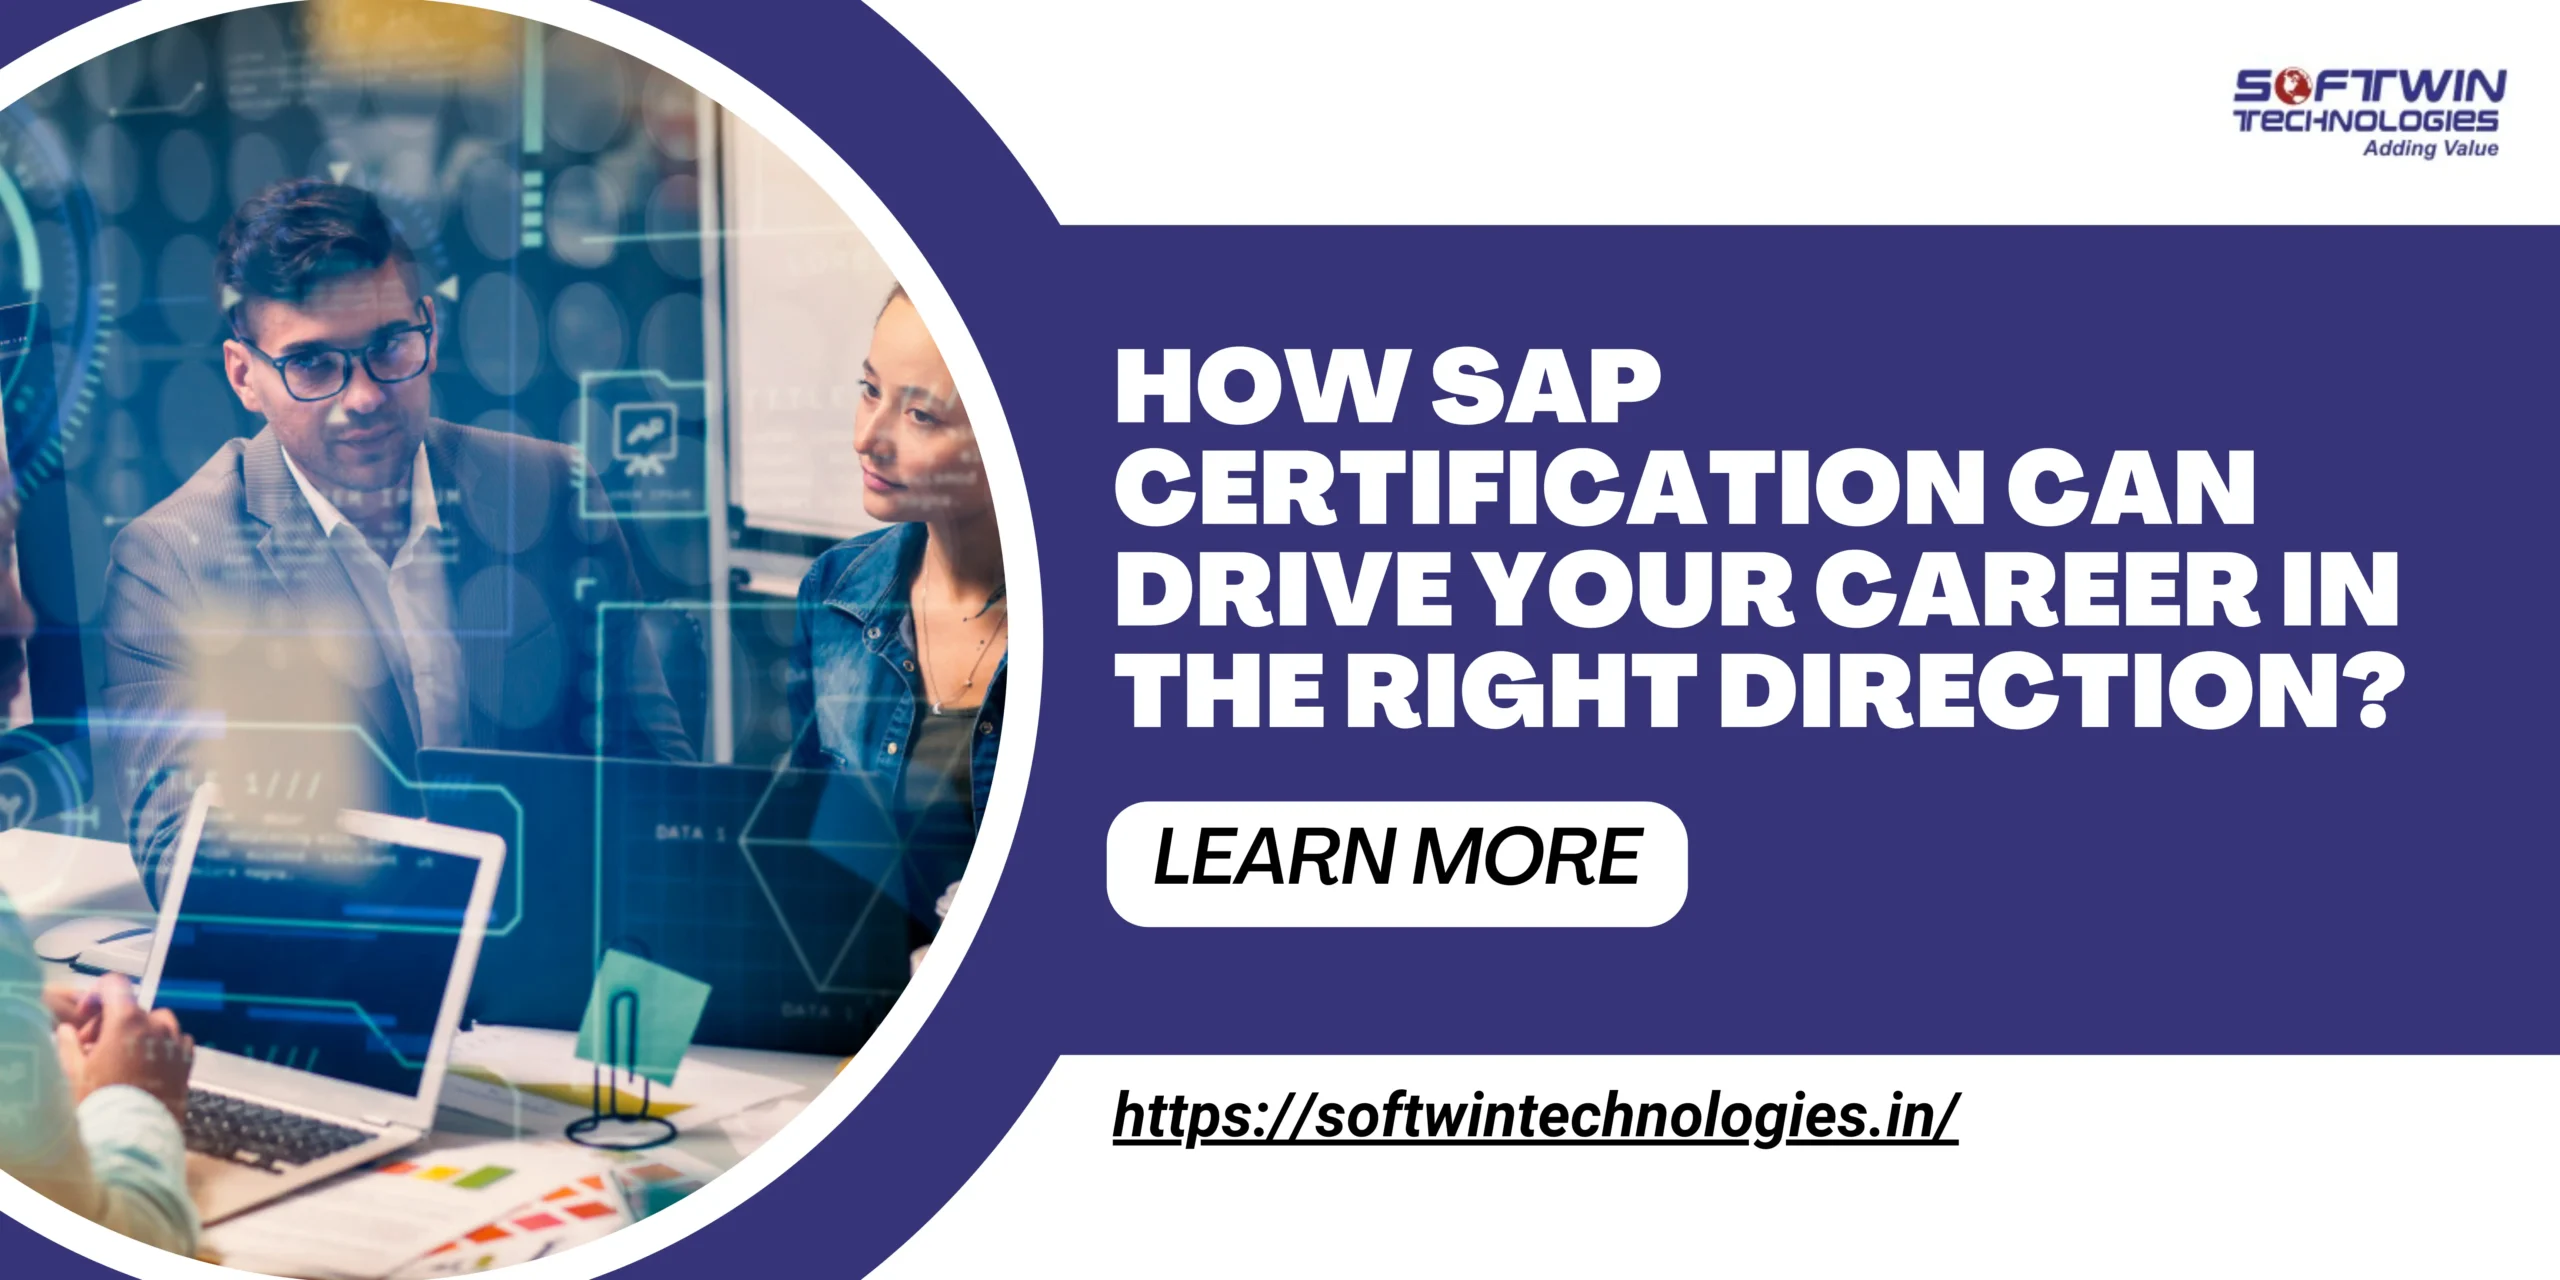 How SAP Certification Can Drive Career in the Right Direction